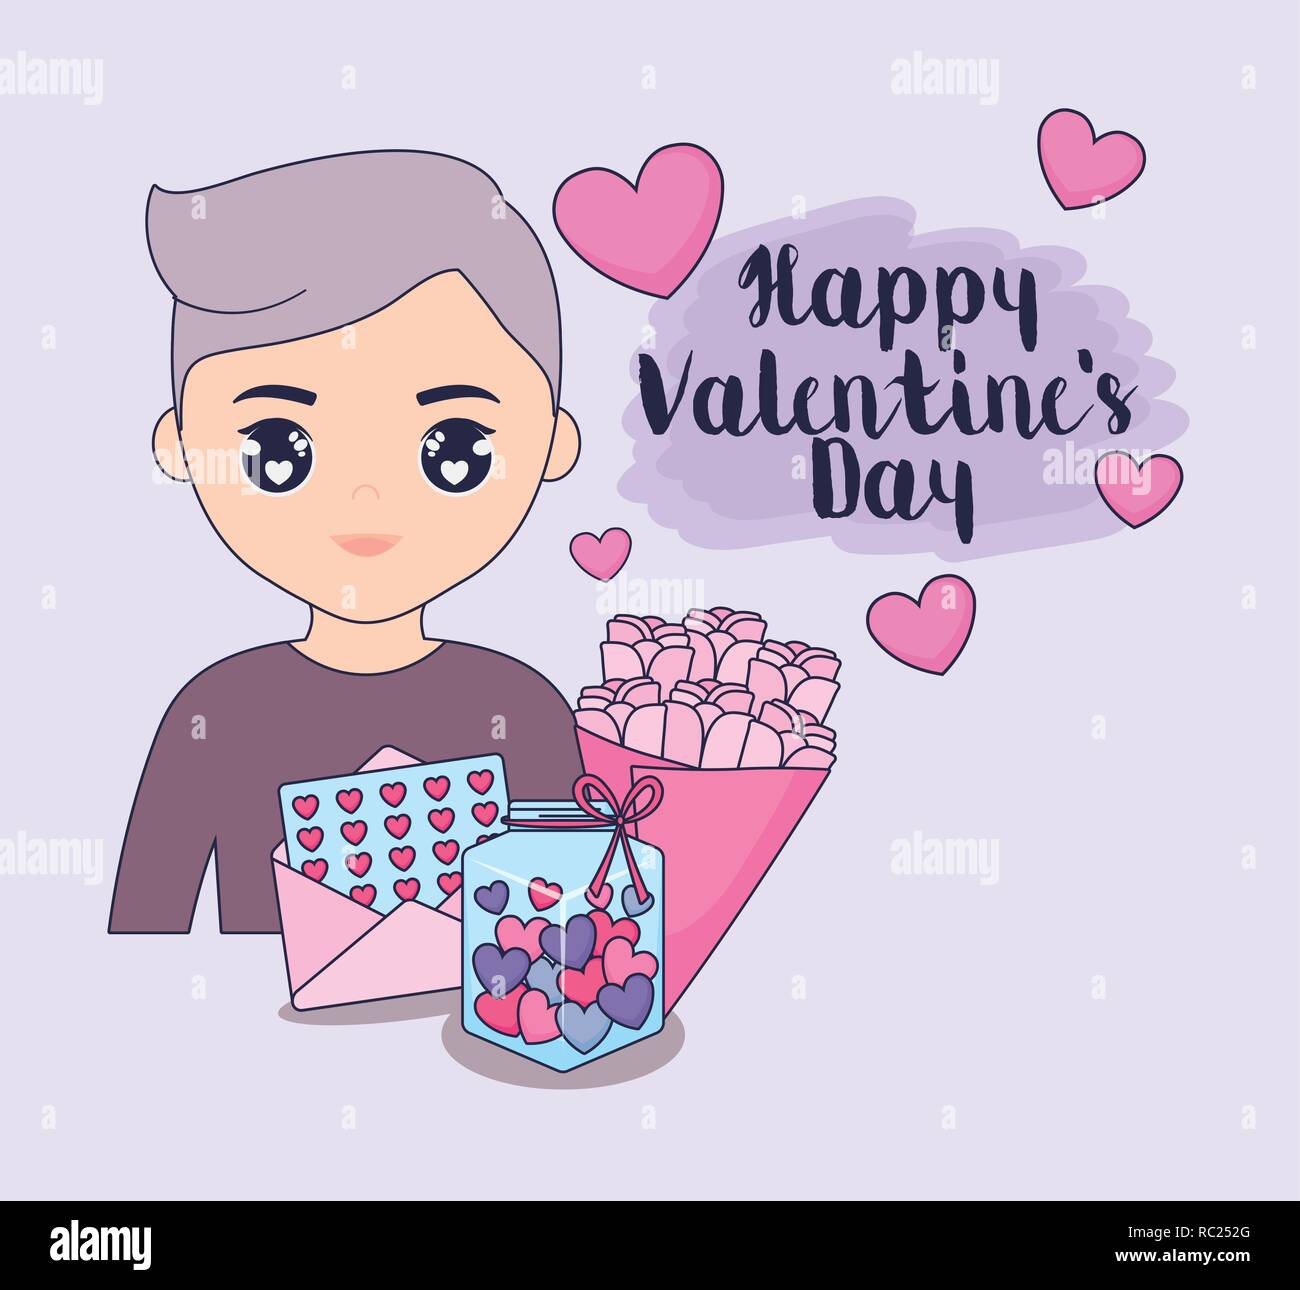 valentines day card with cute boy vector illustration design Stock Vector